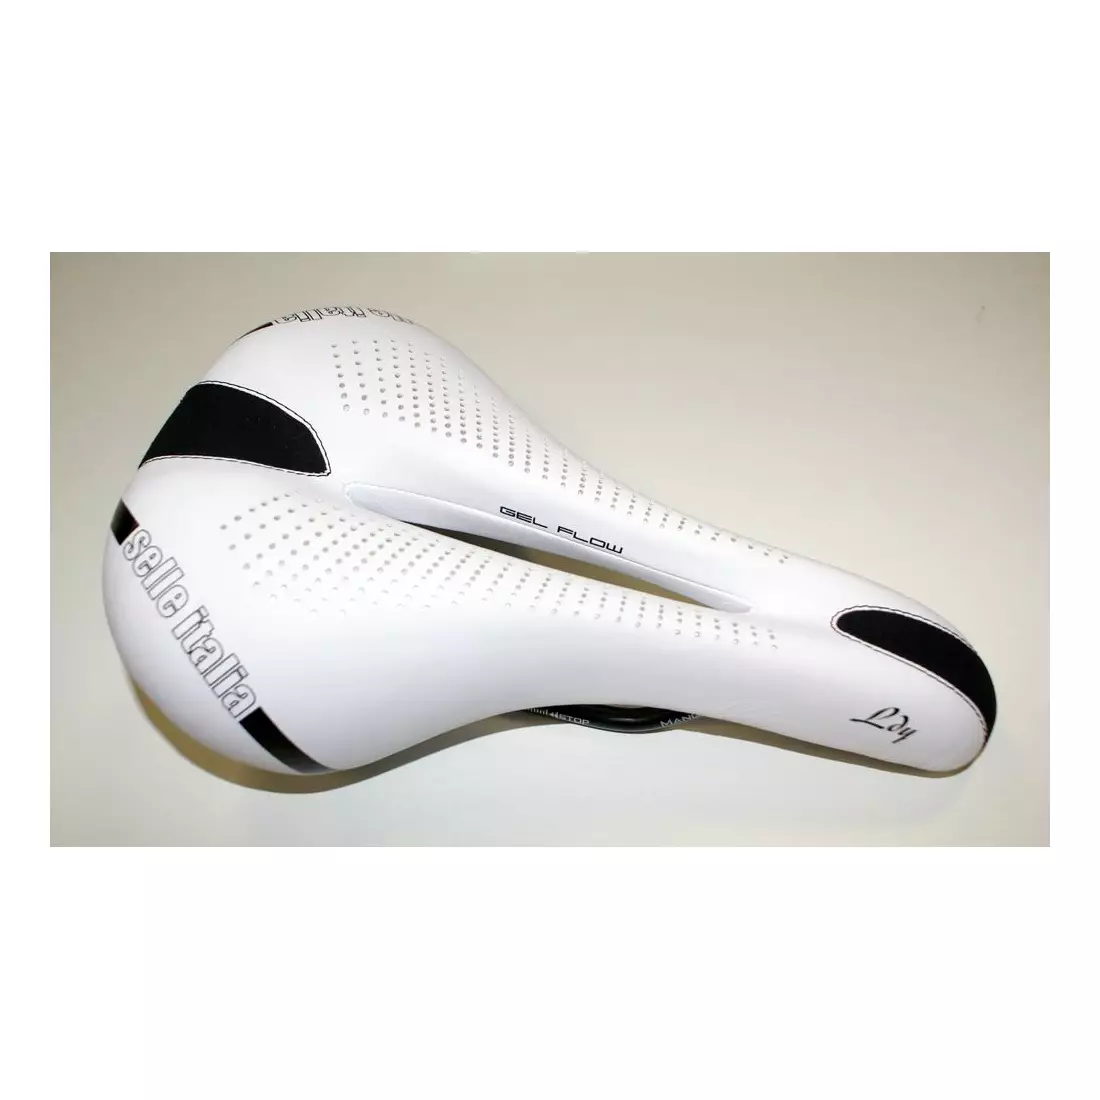 SELLE ITALIA women's bicycle seat lady gel flow s (id match - S2) 300g white 